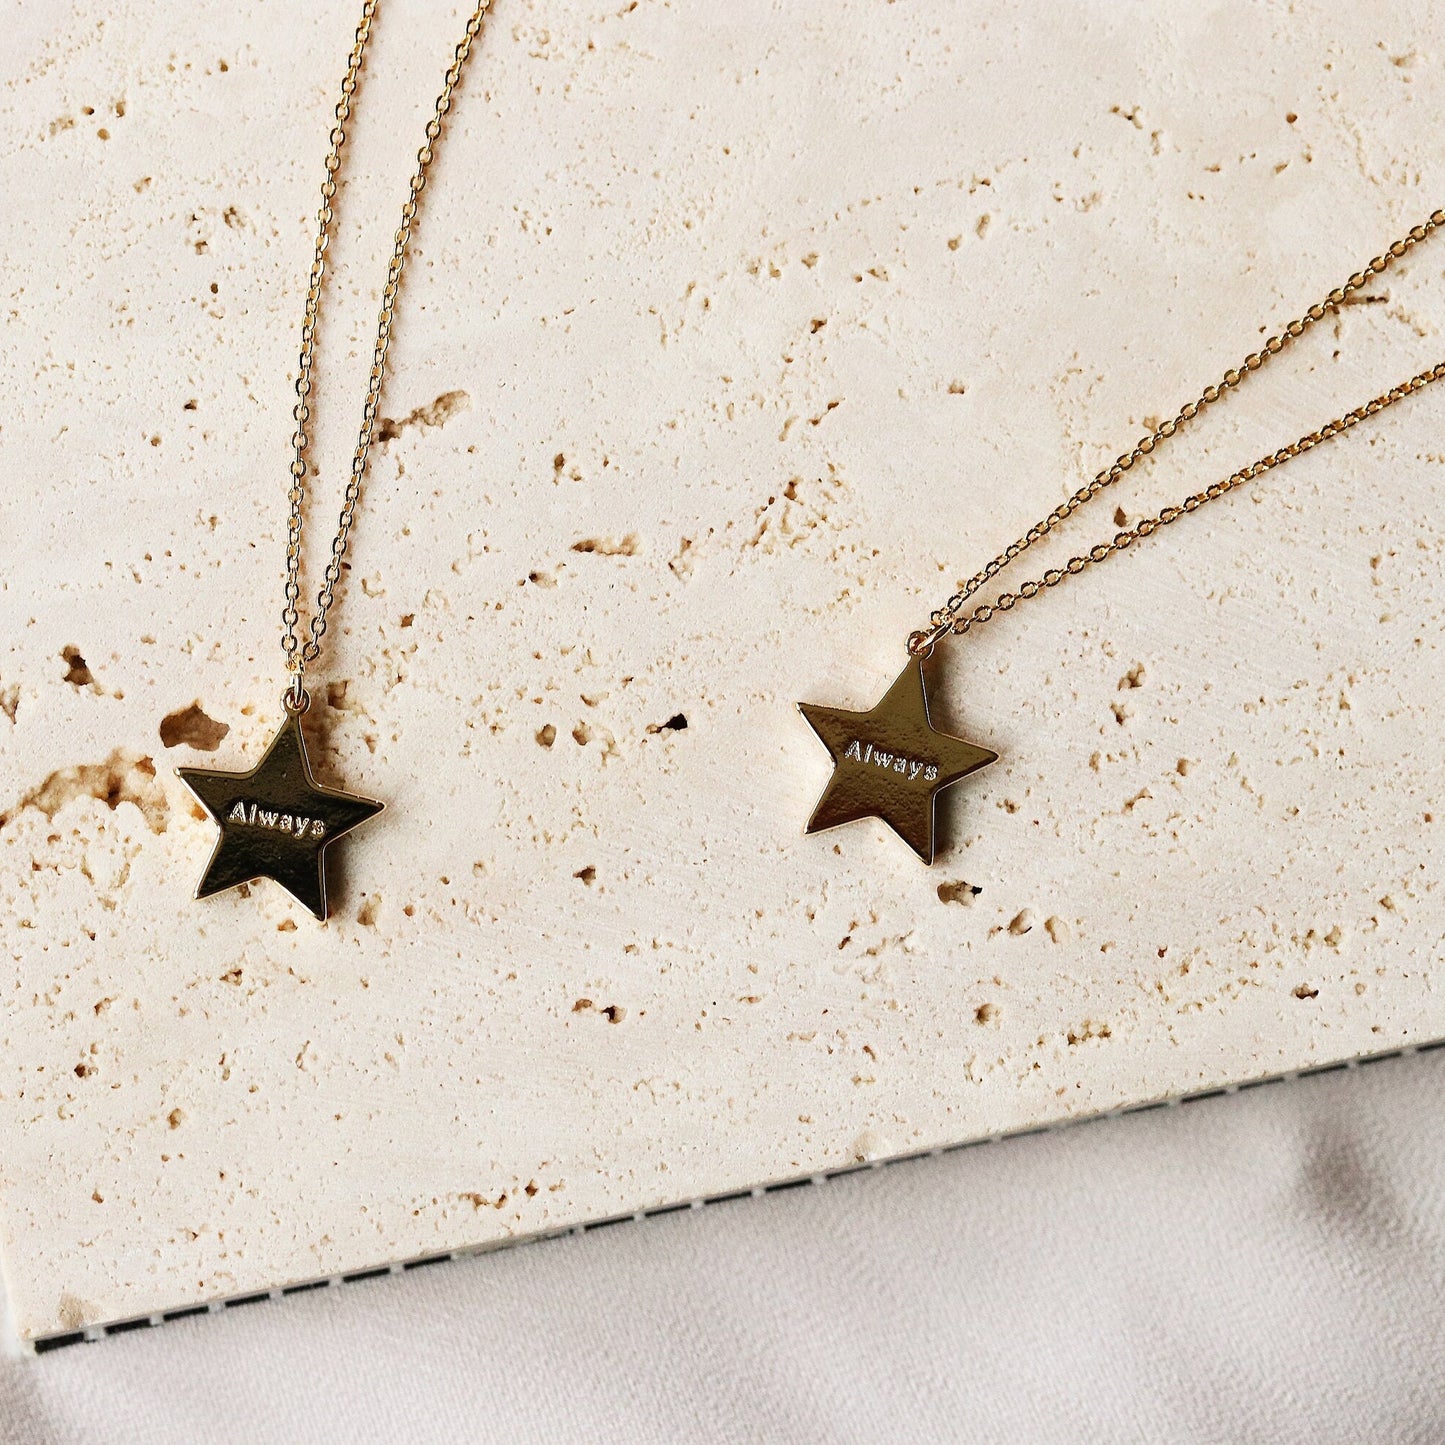 Gold Sister Star Necklace Gift Set, Gift for Big Sister & Little Sister, Best Friends Dainty Necklace, Rose Gold Star Necklace, Gift for Her